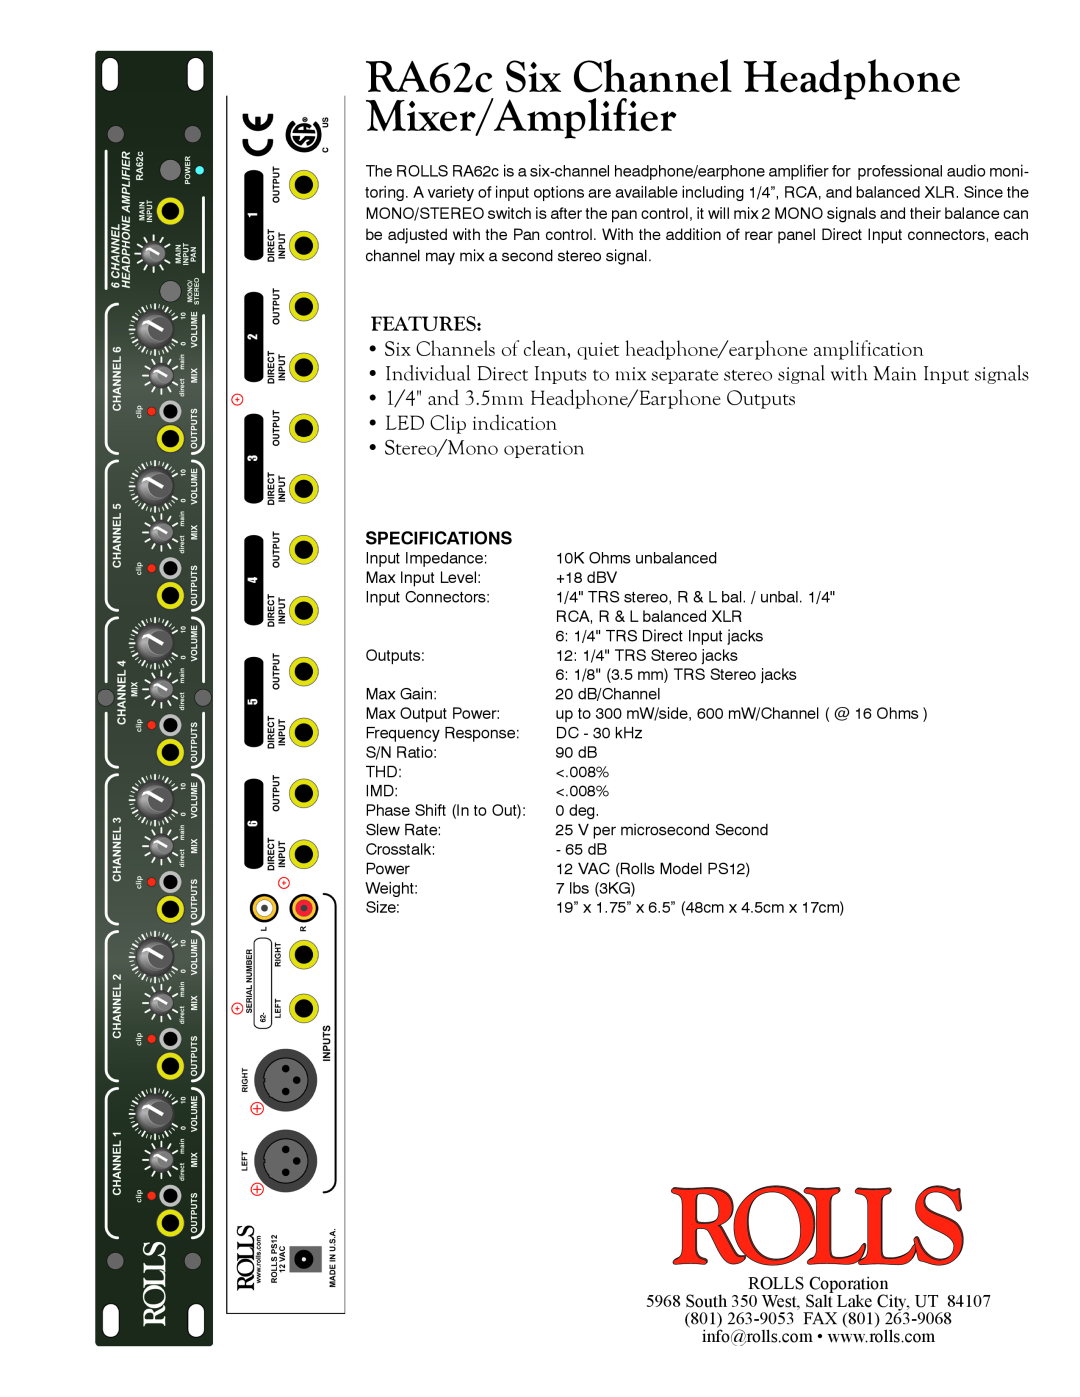 Rolls specifications Schematic, Specifications, RA62c Six Channel, Headphone Mixer/Amplifier, Owners Manual 